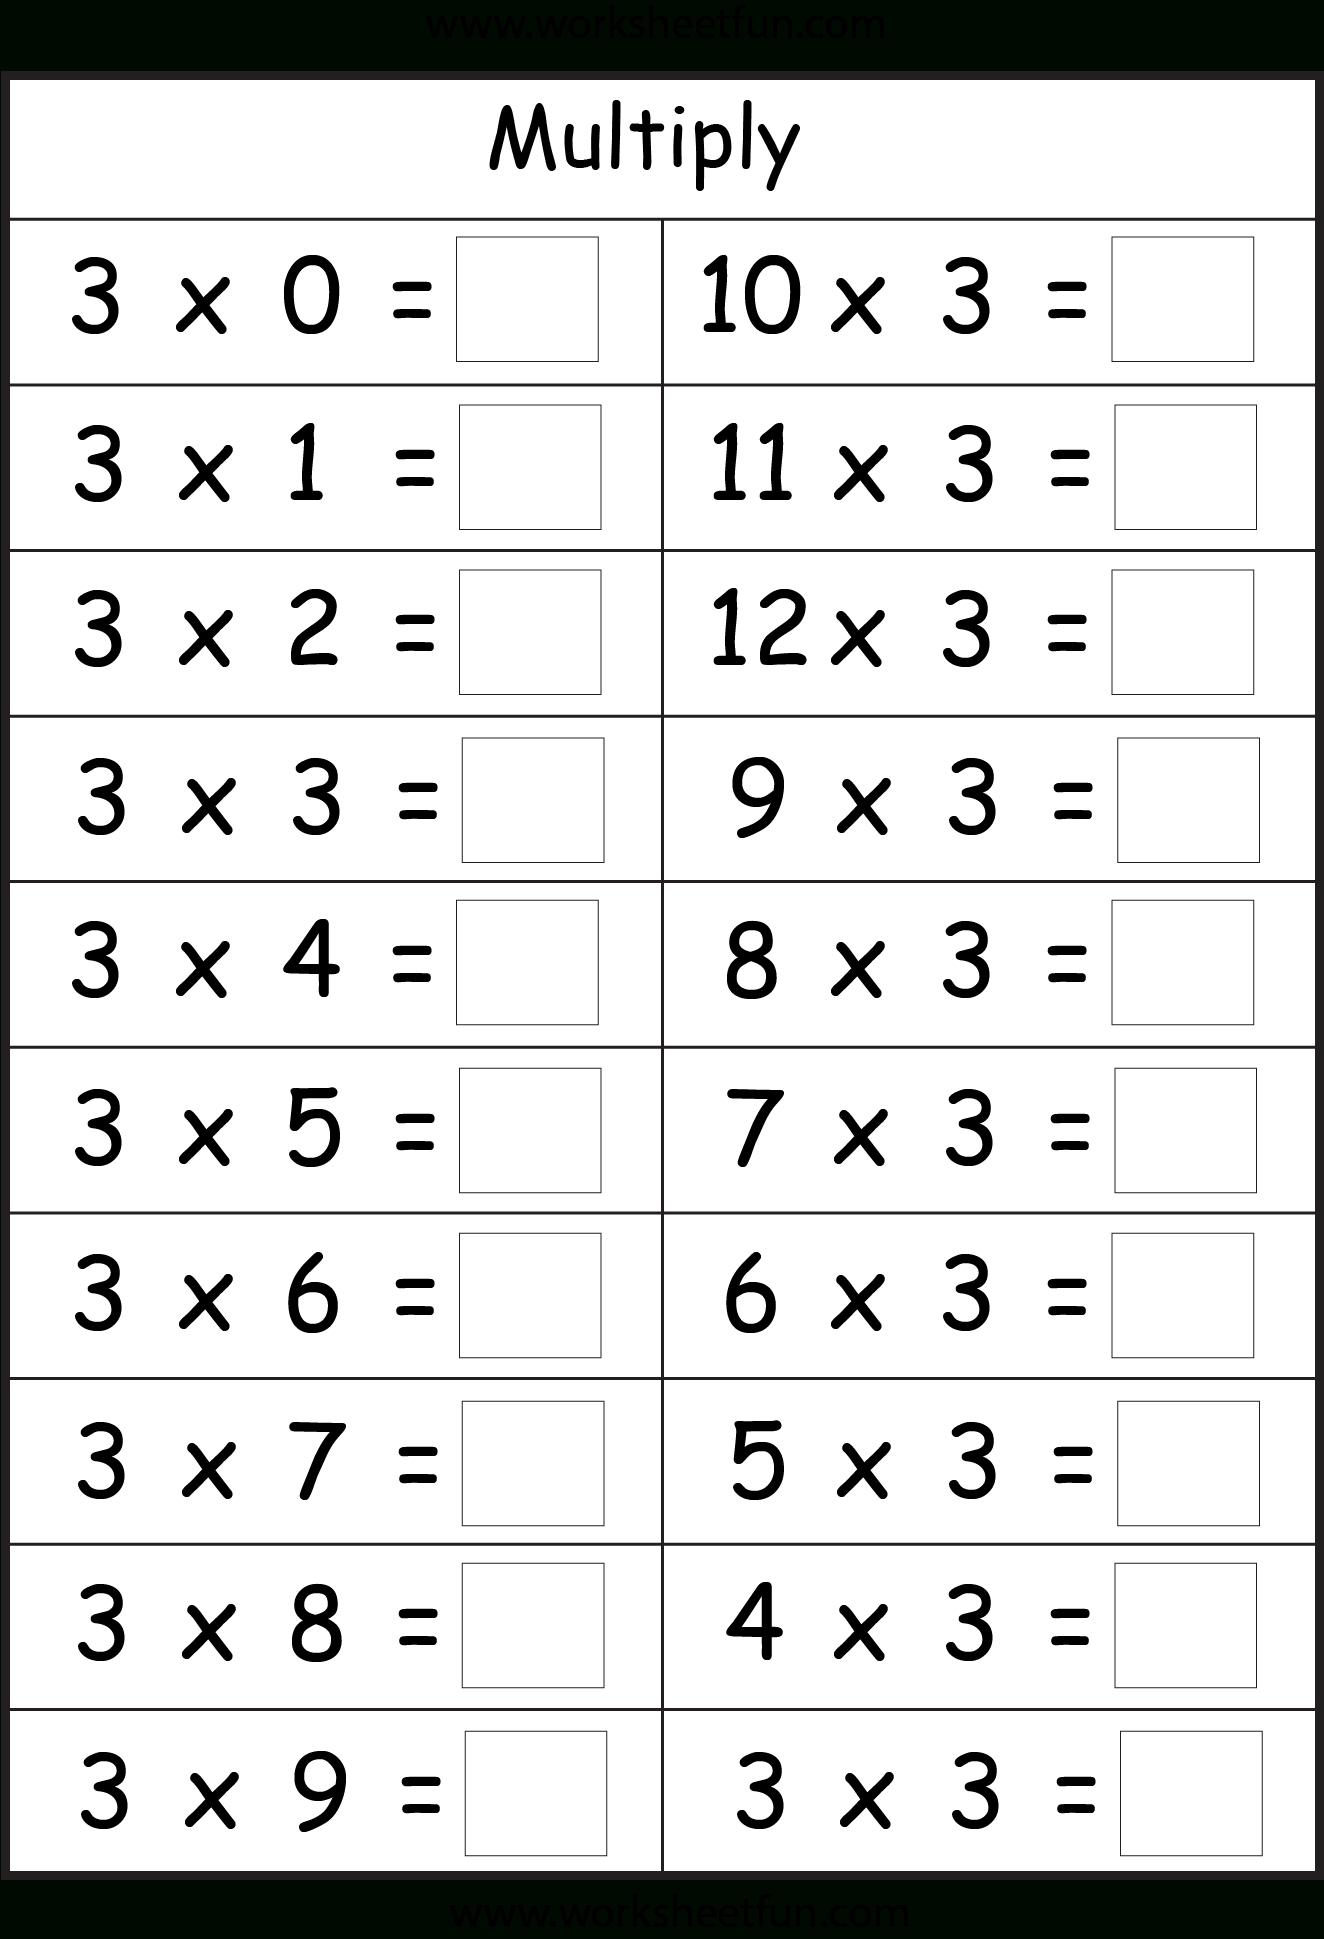 my homework lesson 4 multiply by 4